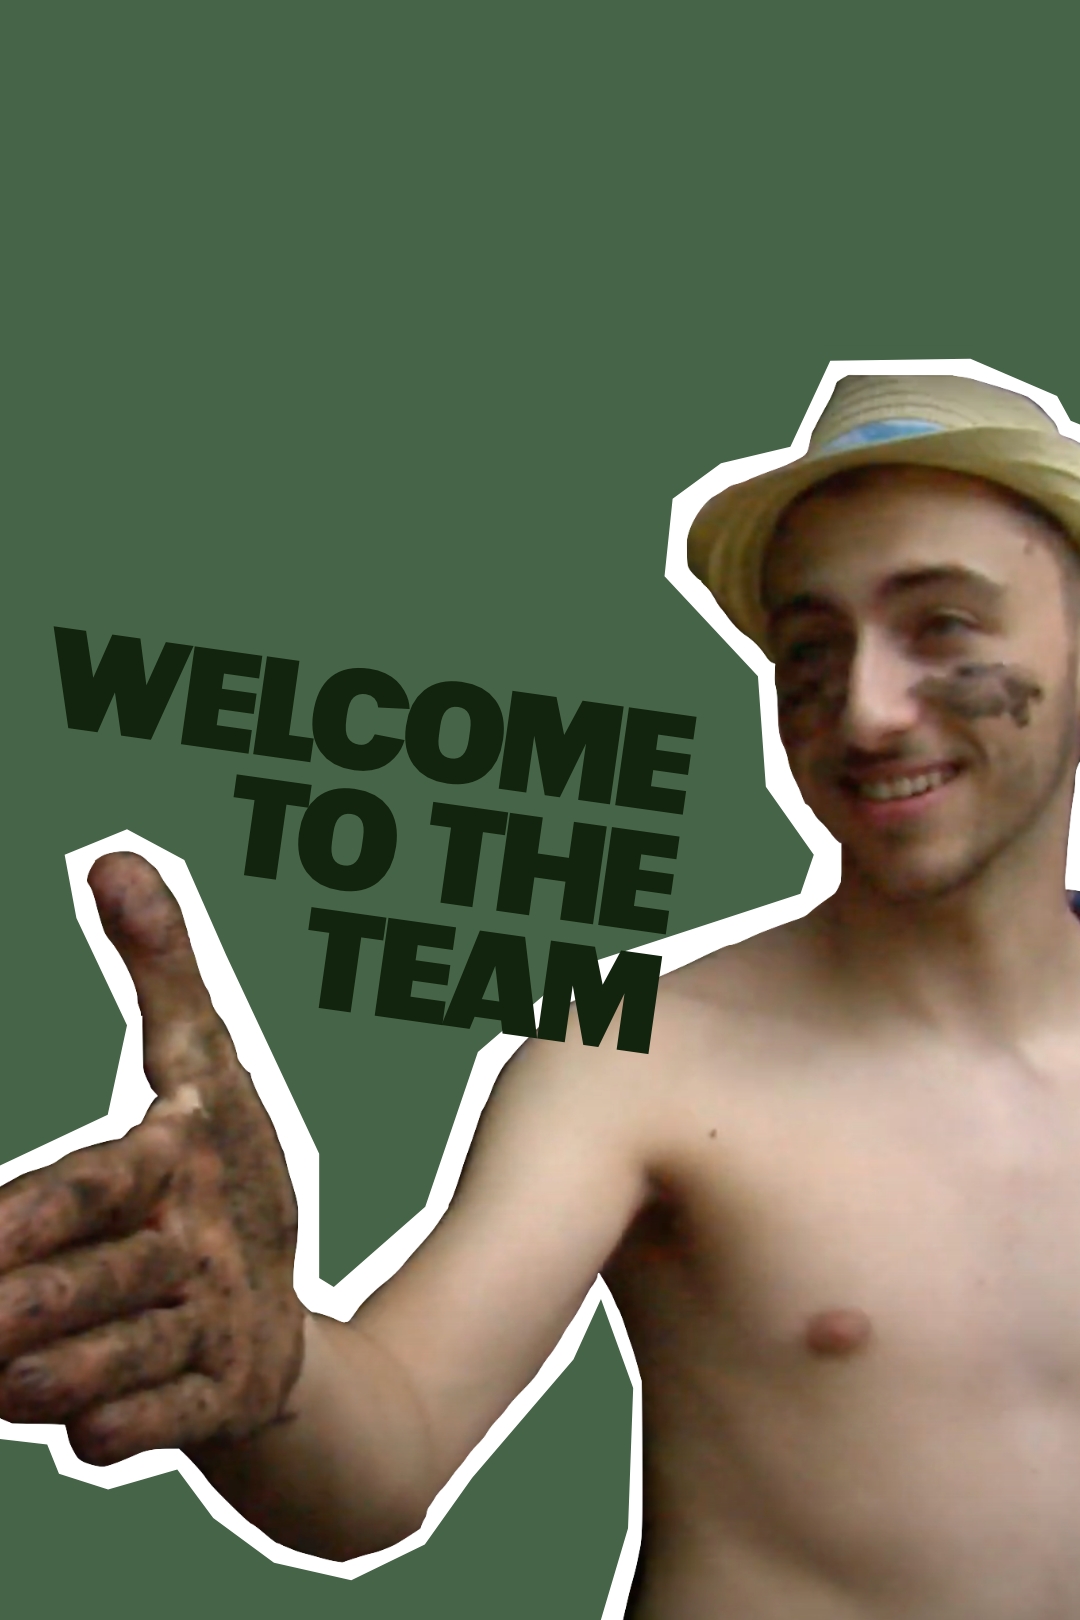 Poster for the film "Welcome to the Team"